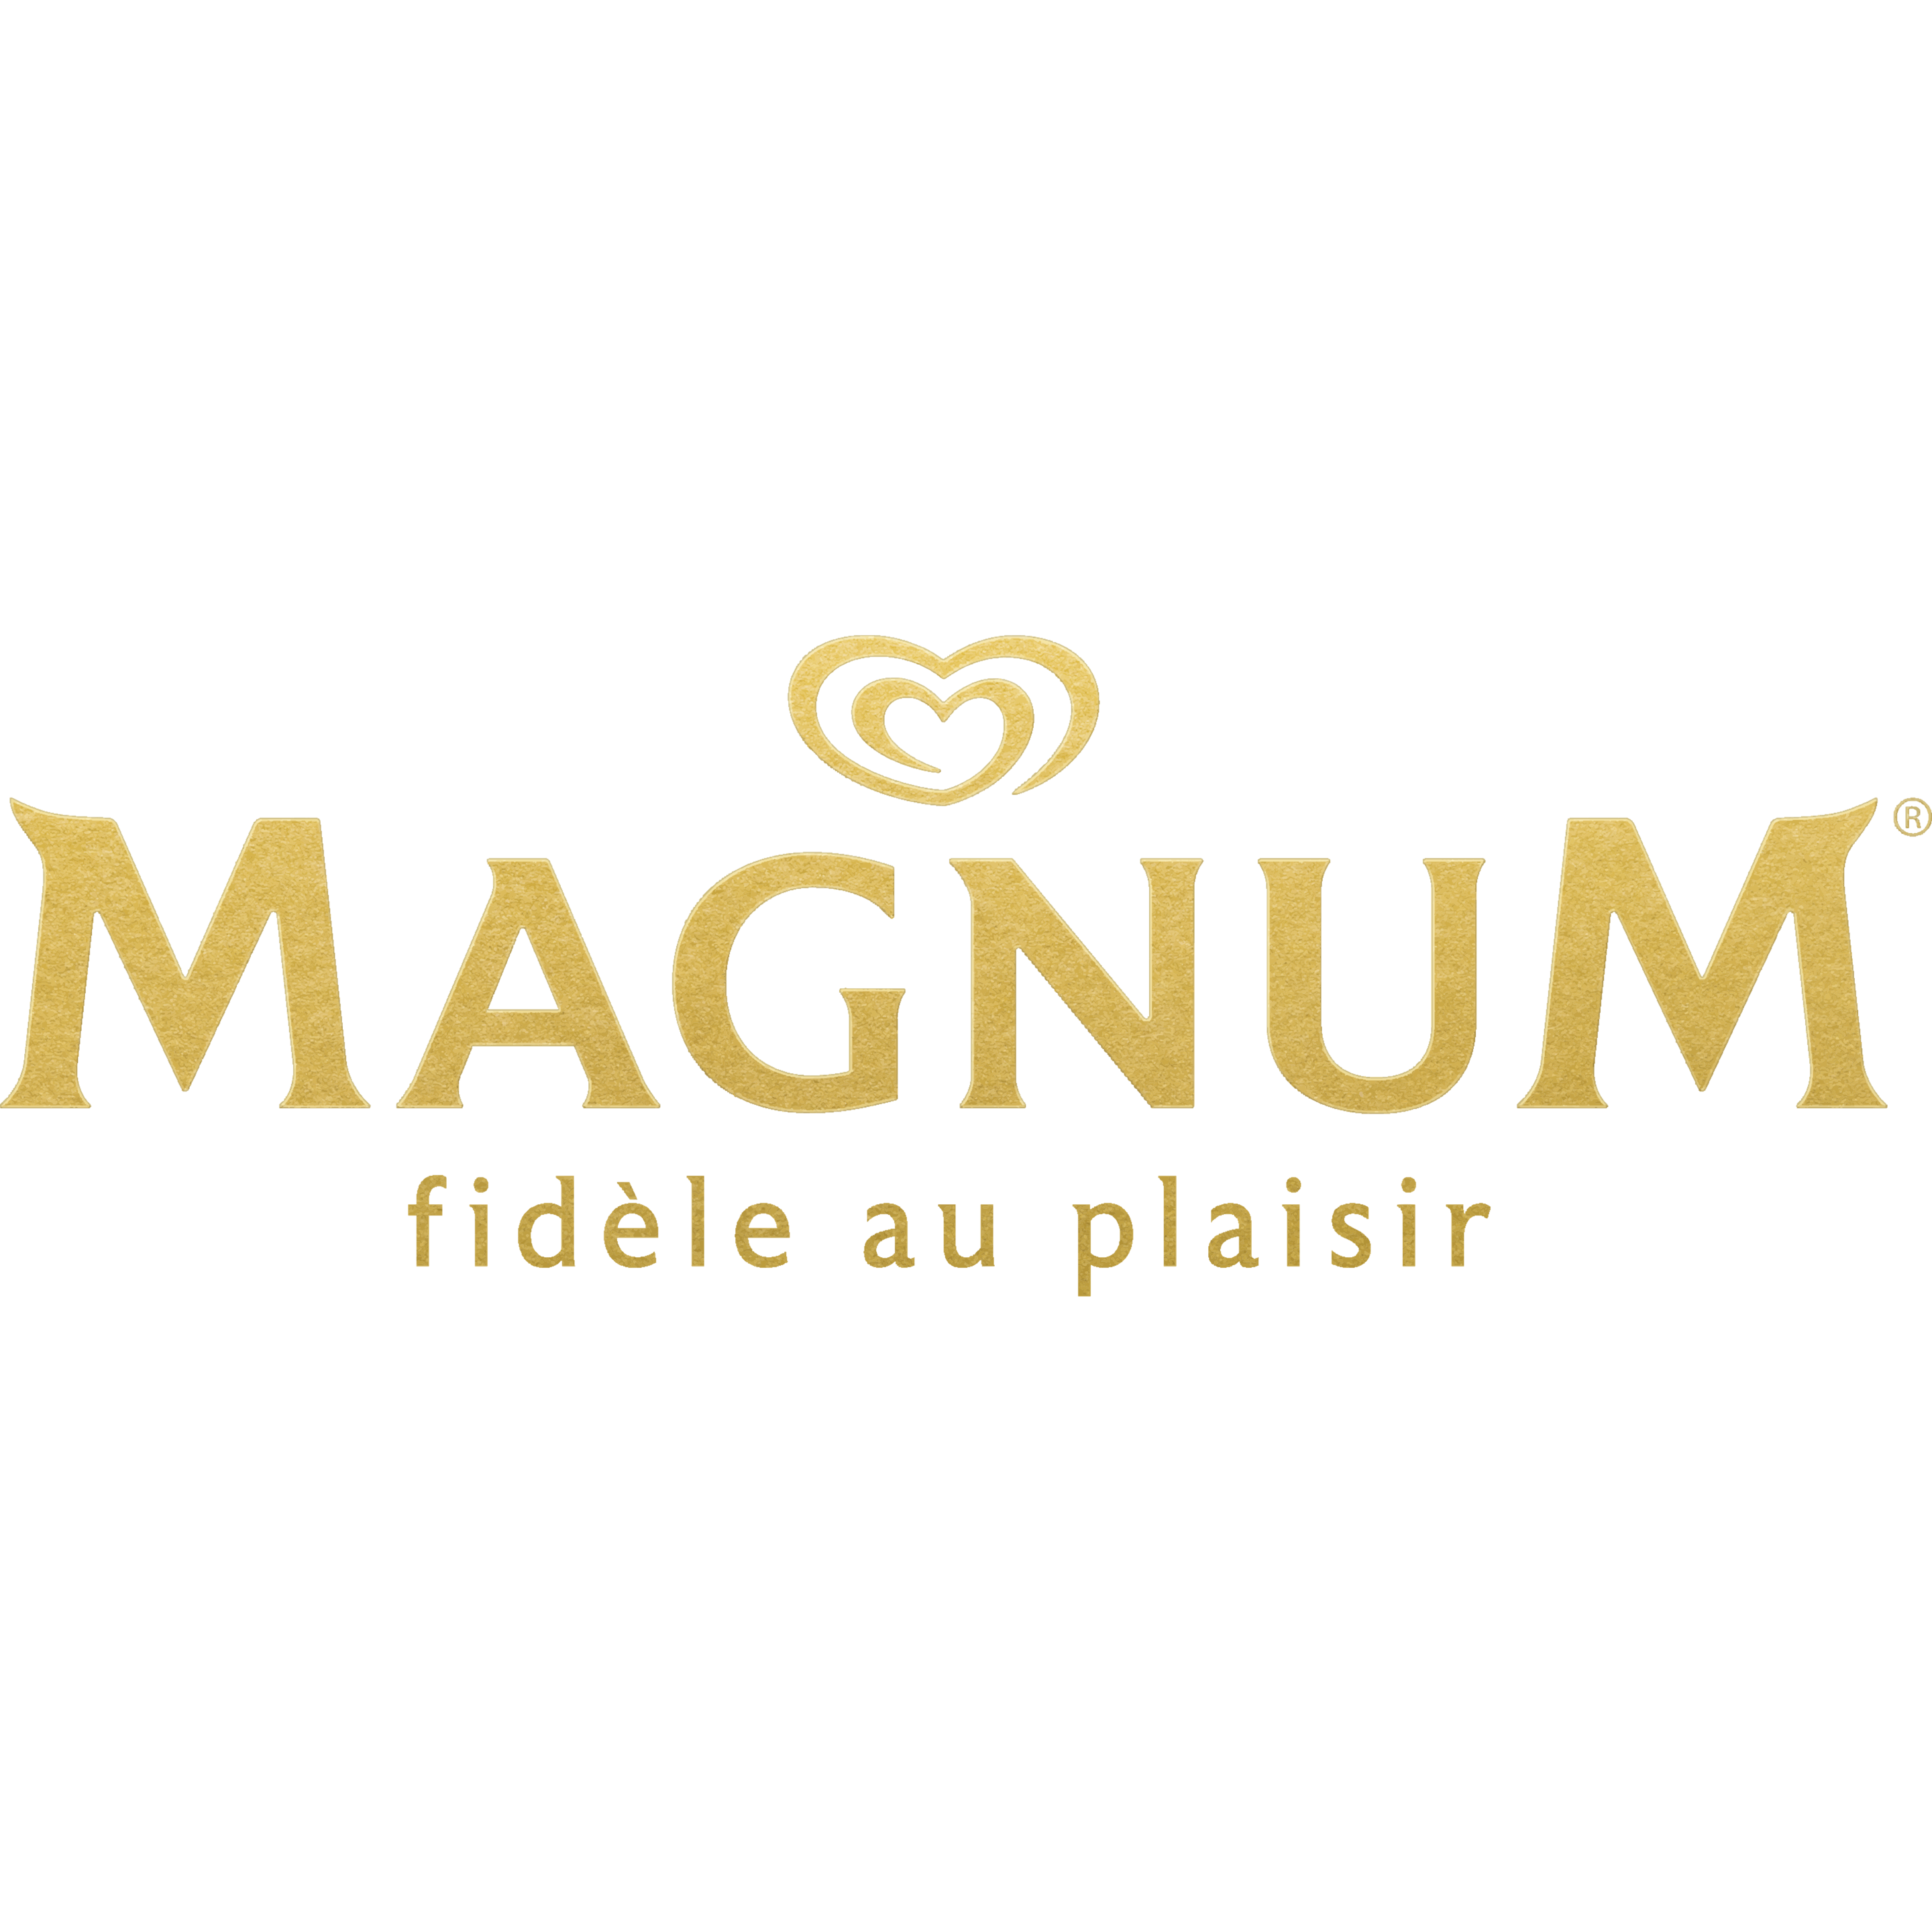 Brand logo with link to home page Magnum France